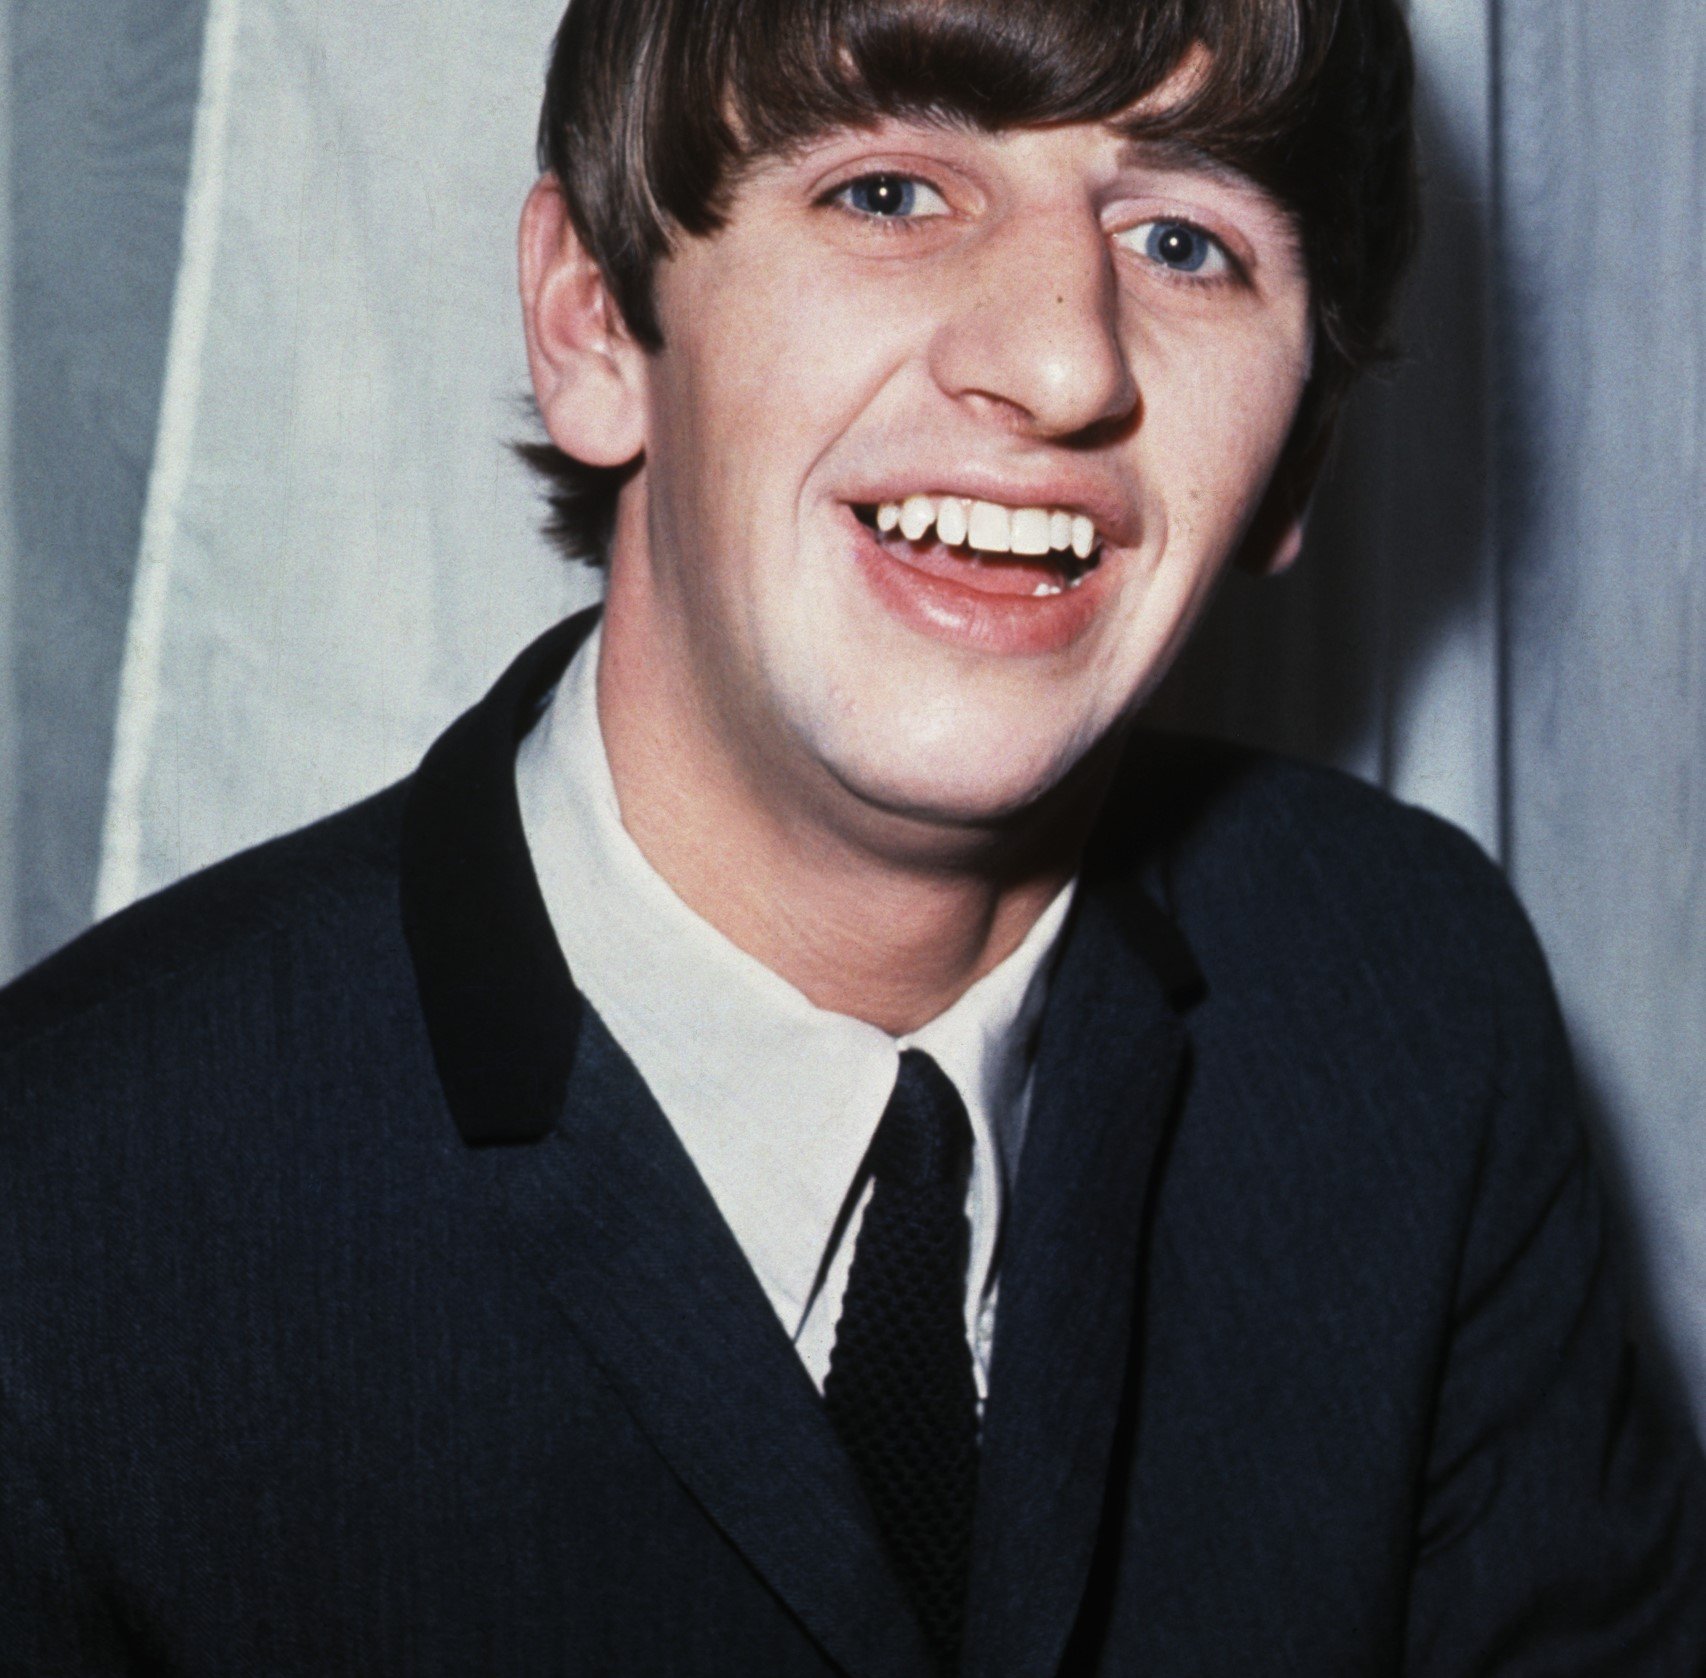 The Beatles' Ringo Starr wearing a suit